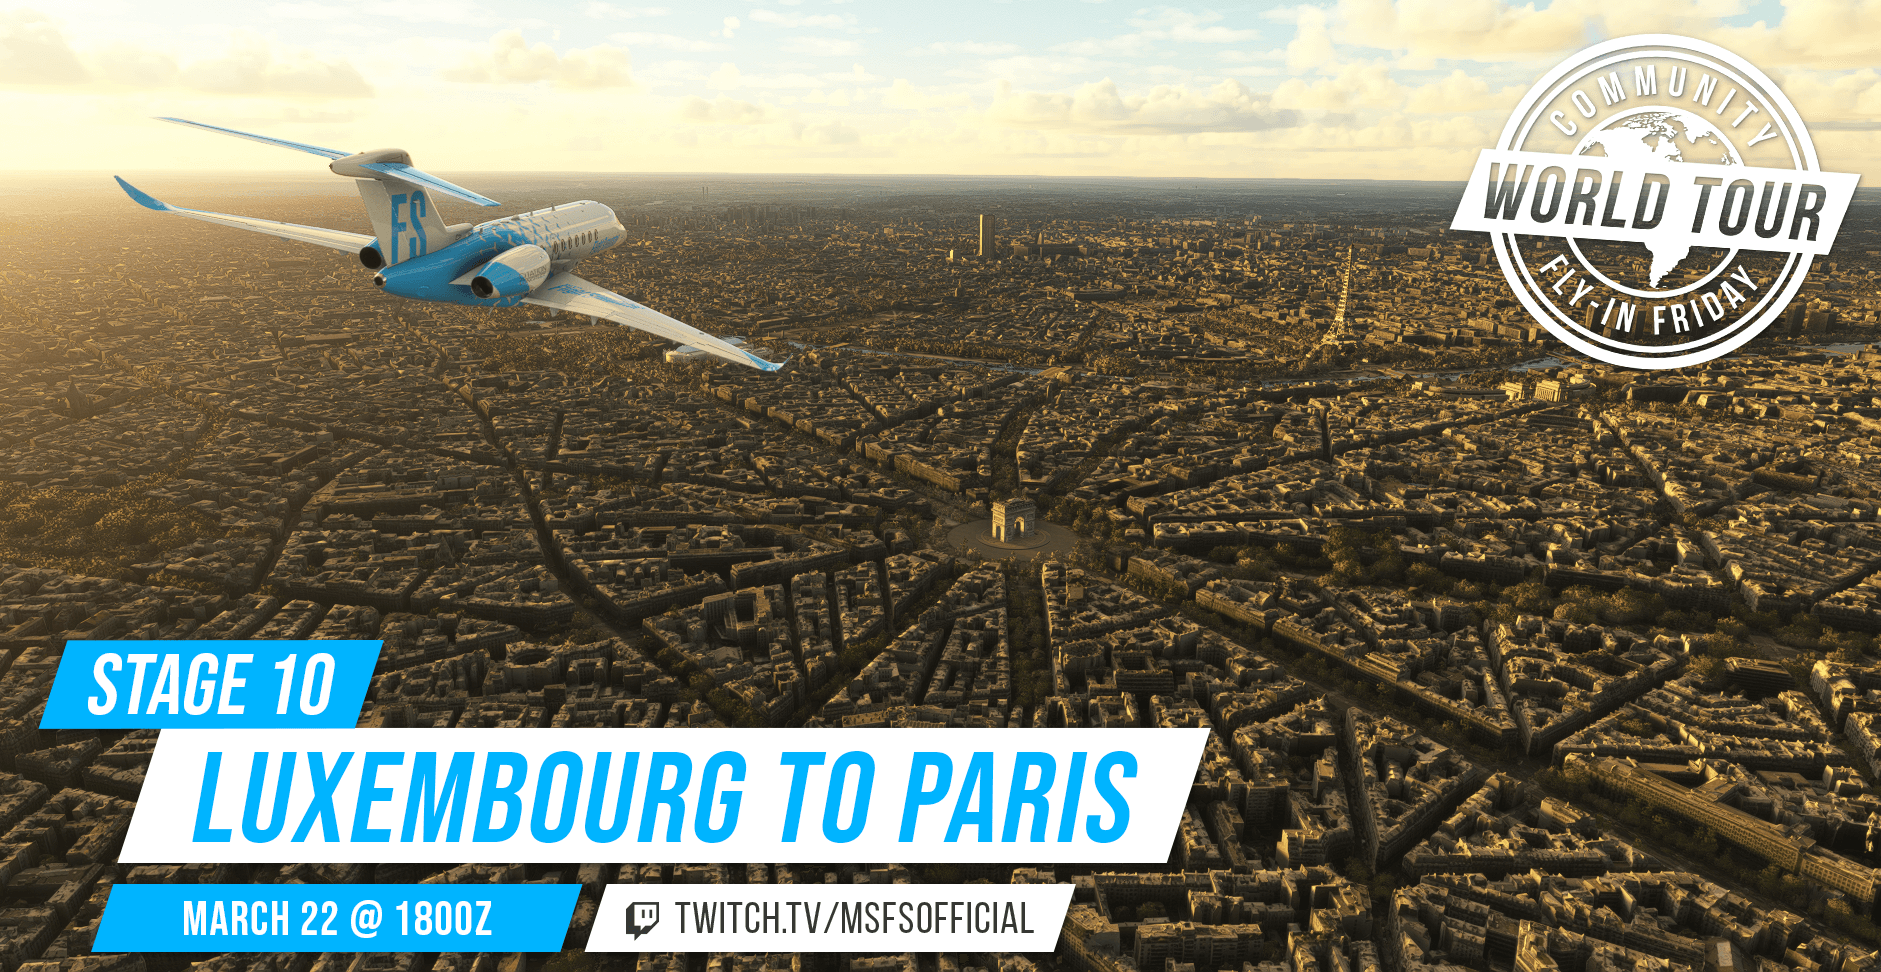 Community Fly-In Friday: World Tour Stage 10, Luxembourg to Paris. March 22nd at 1800 UTC. twitch.tv/msfsofficial